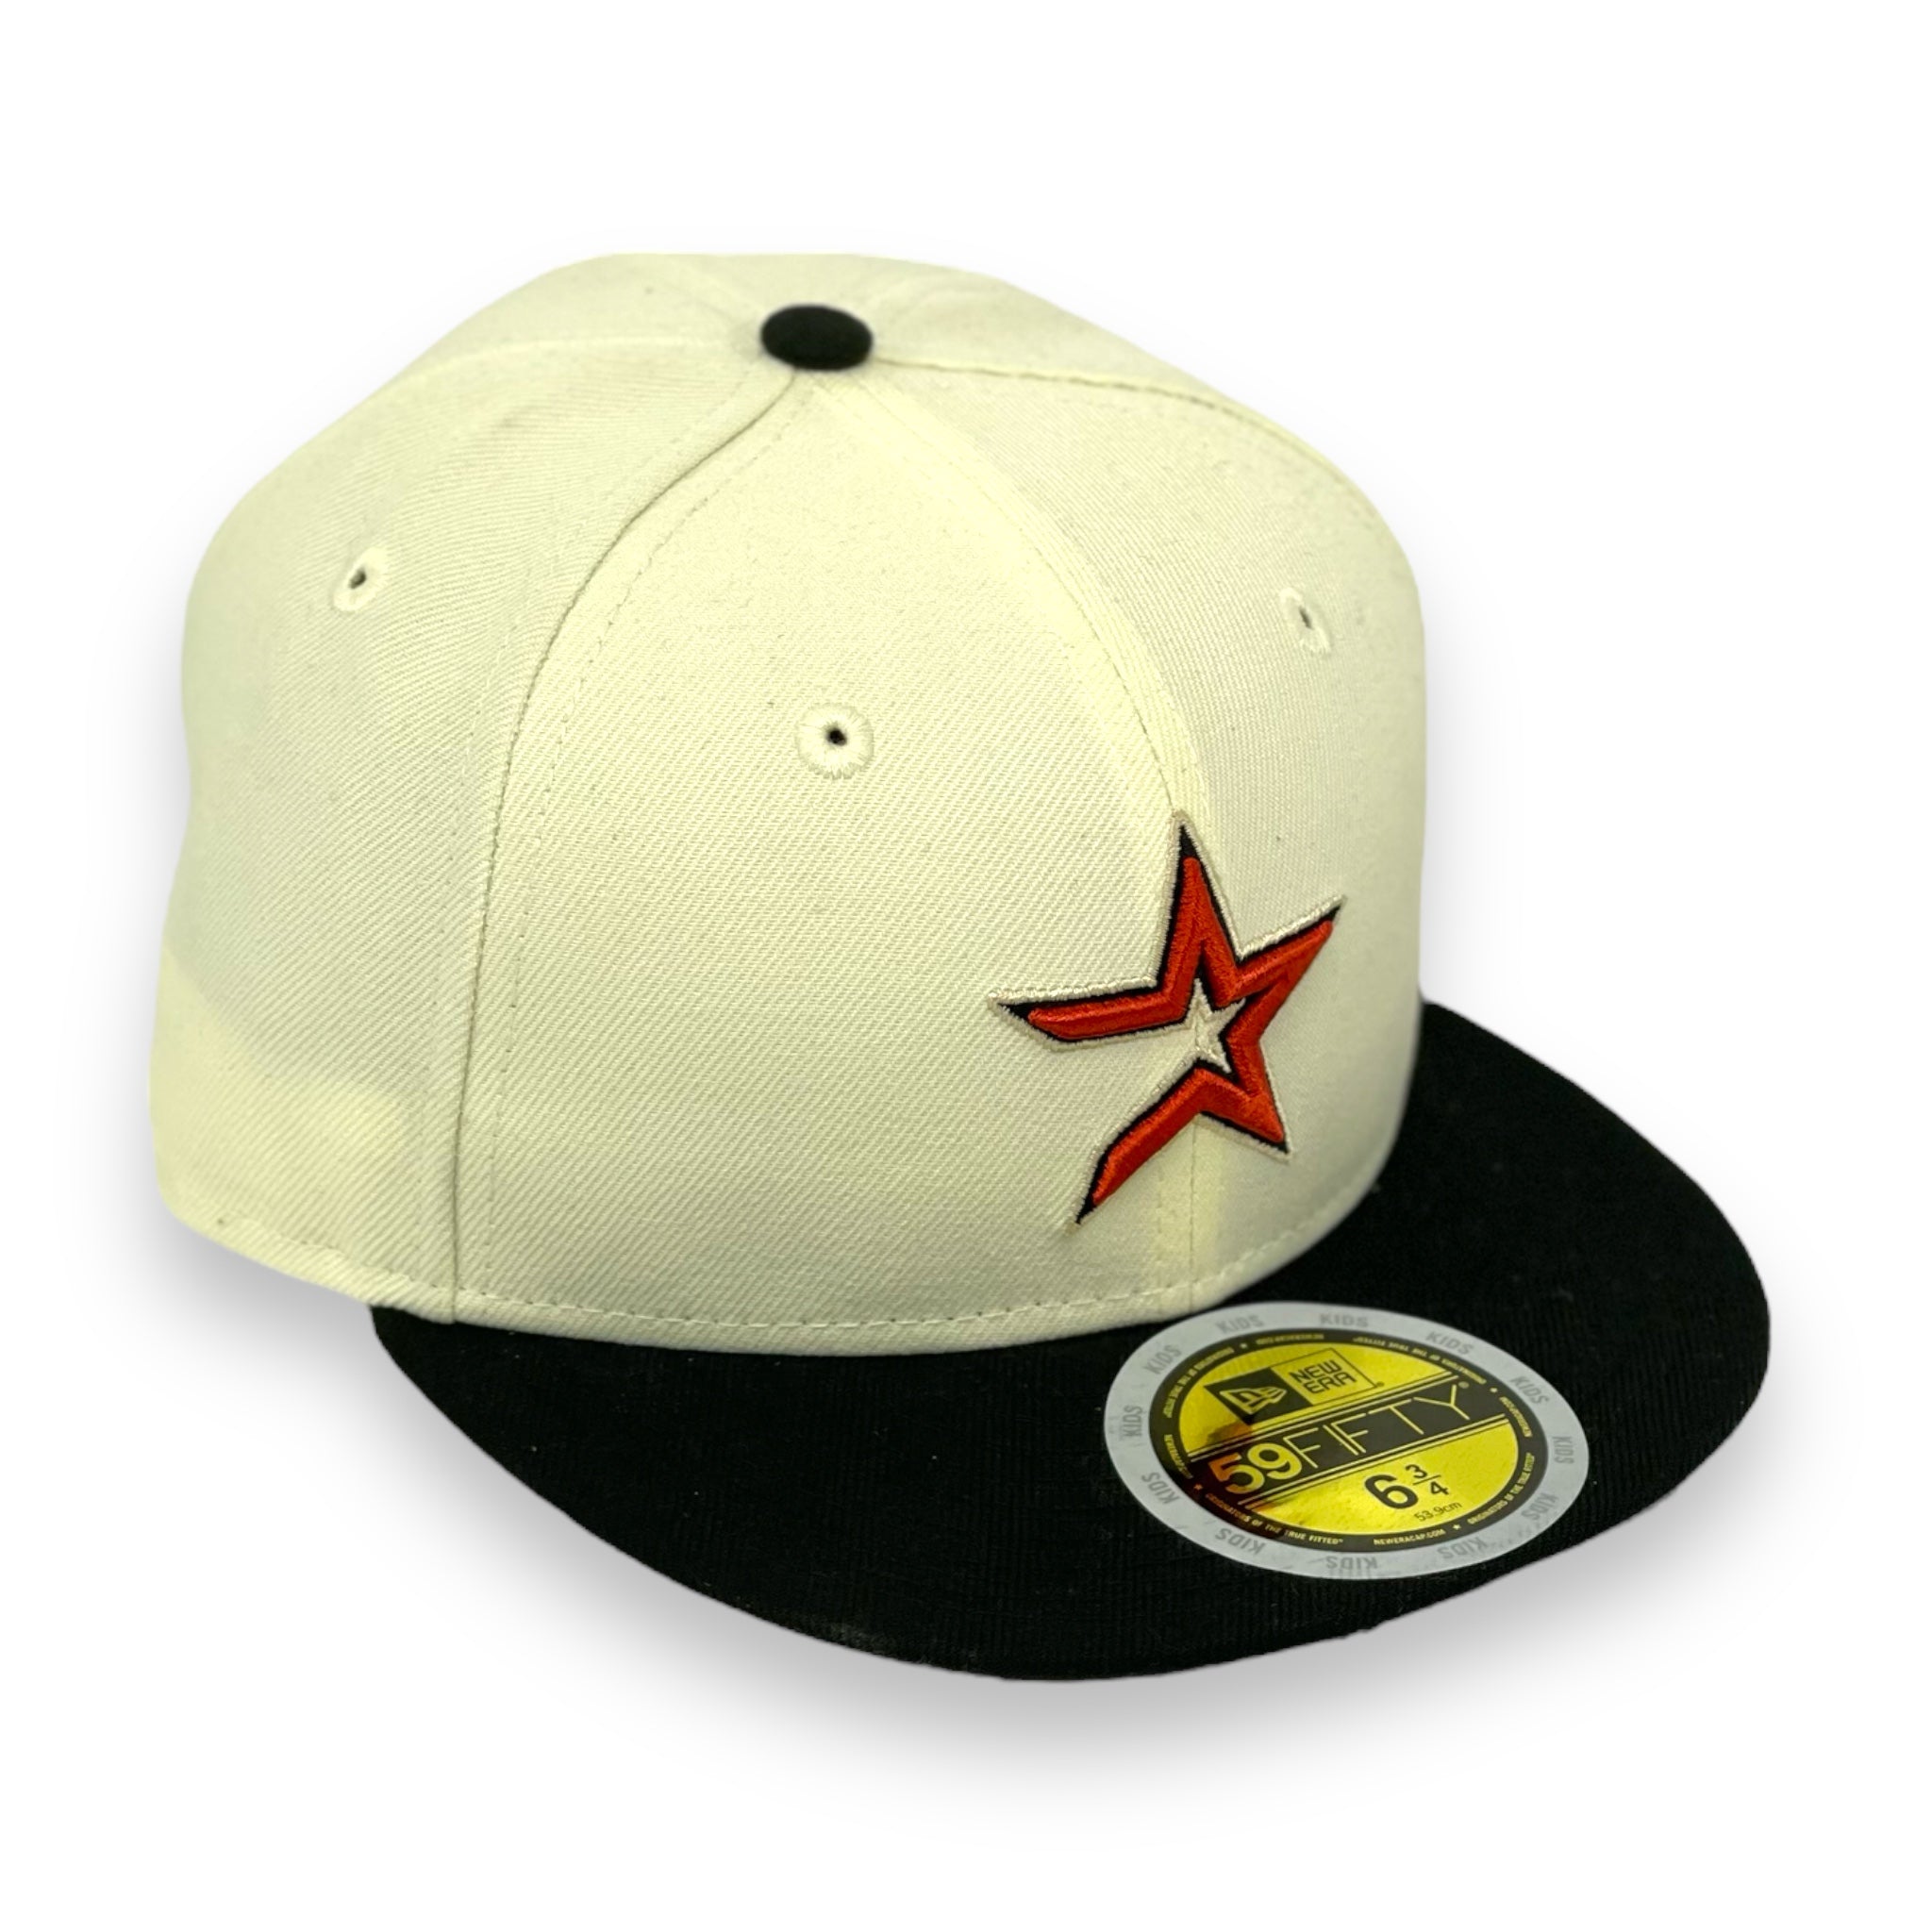 KIDS - HOUSTON ASTROS (OFF-WHITE) NEW ERA 59FIFTY FITTED